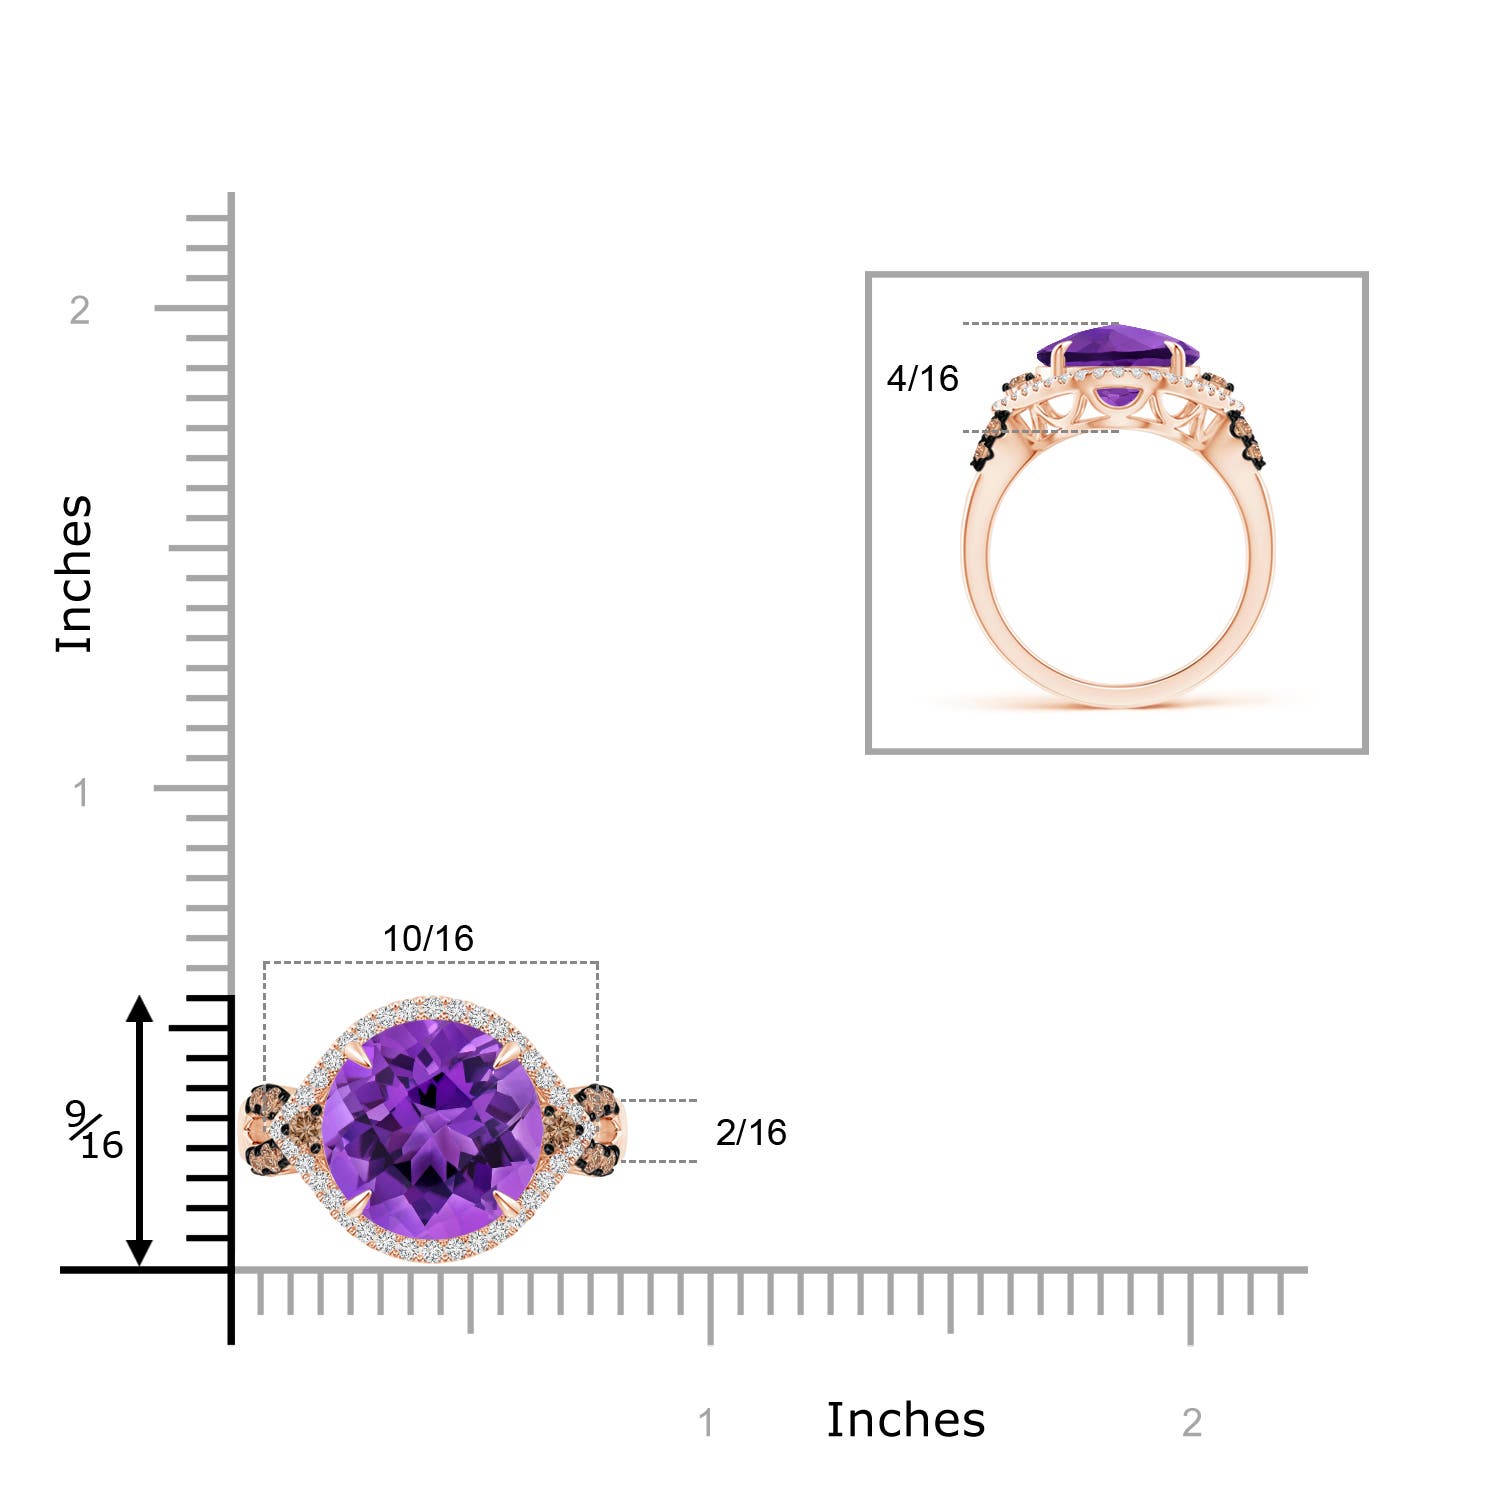 AAA - Amethyst / 4.64 CT / 14 KT Rose Gold